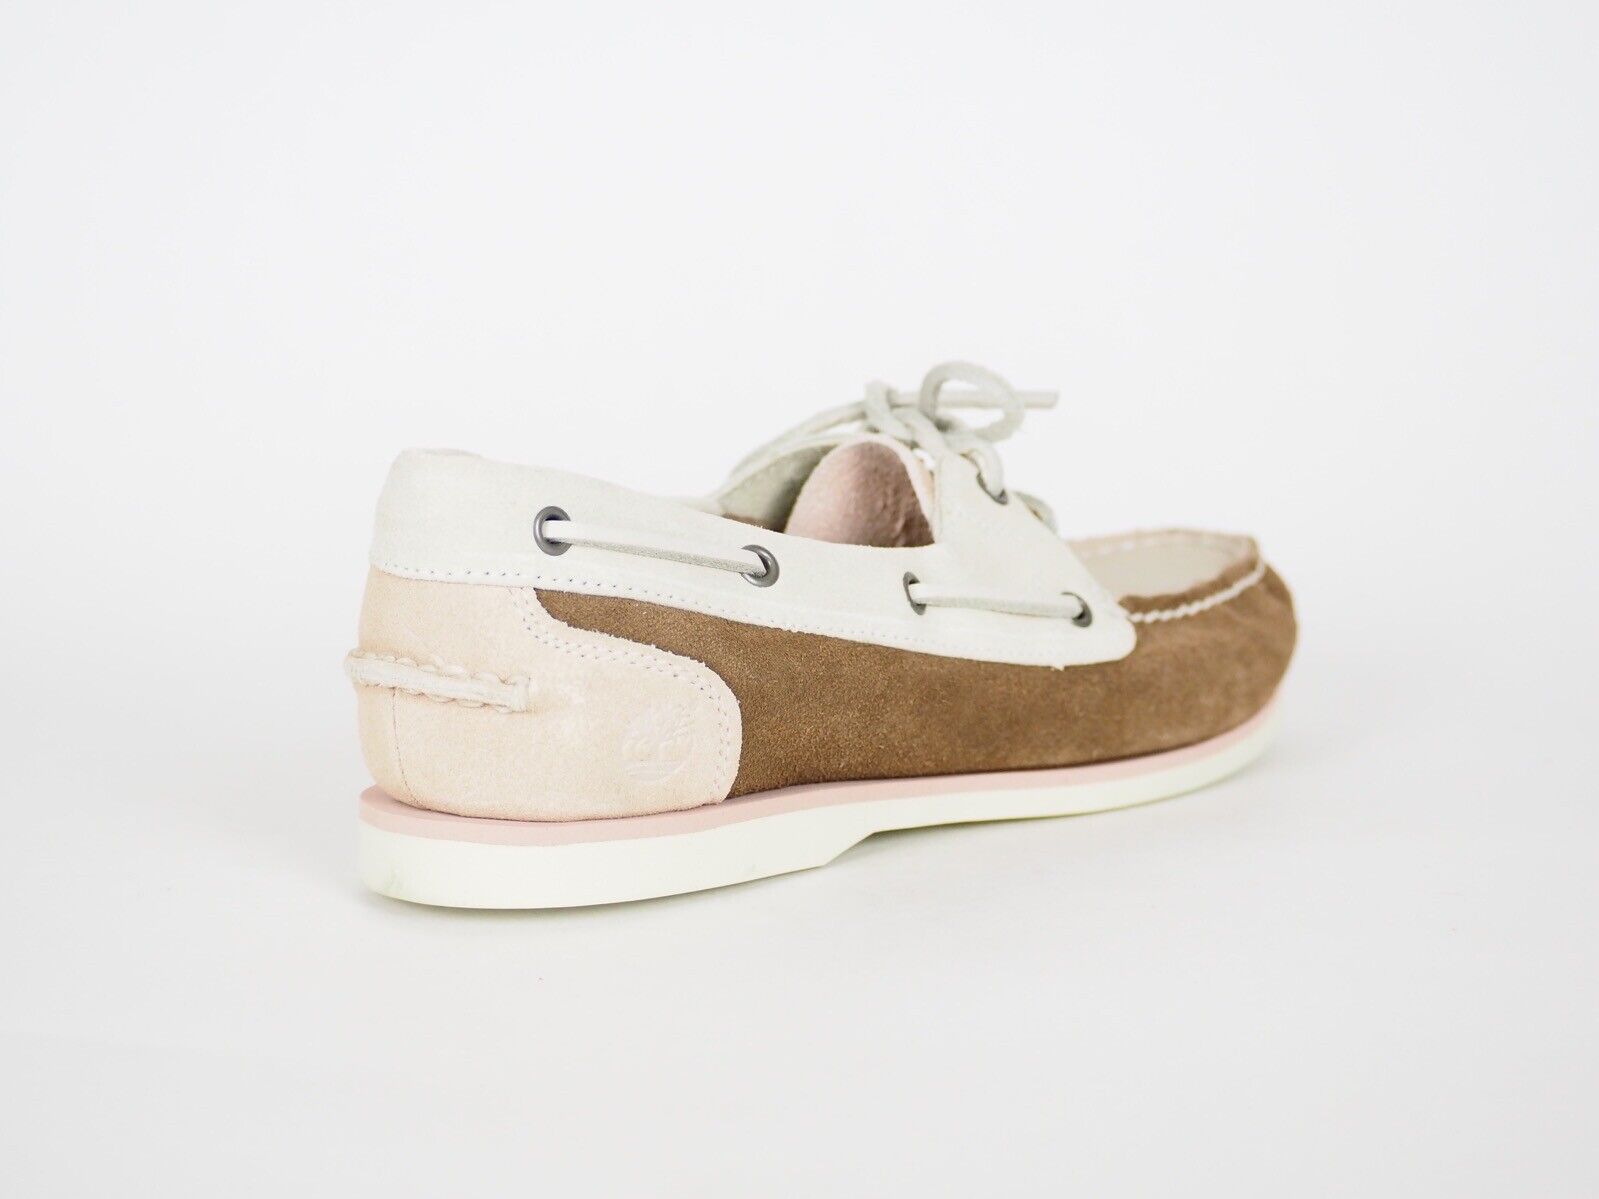 Womens Timberland Classic 2 Eye 3942R Pink Brown Suede Boat Shoes UK 5.5 - London Top Style